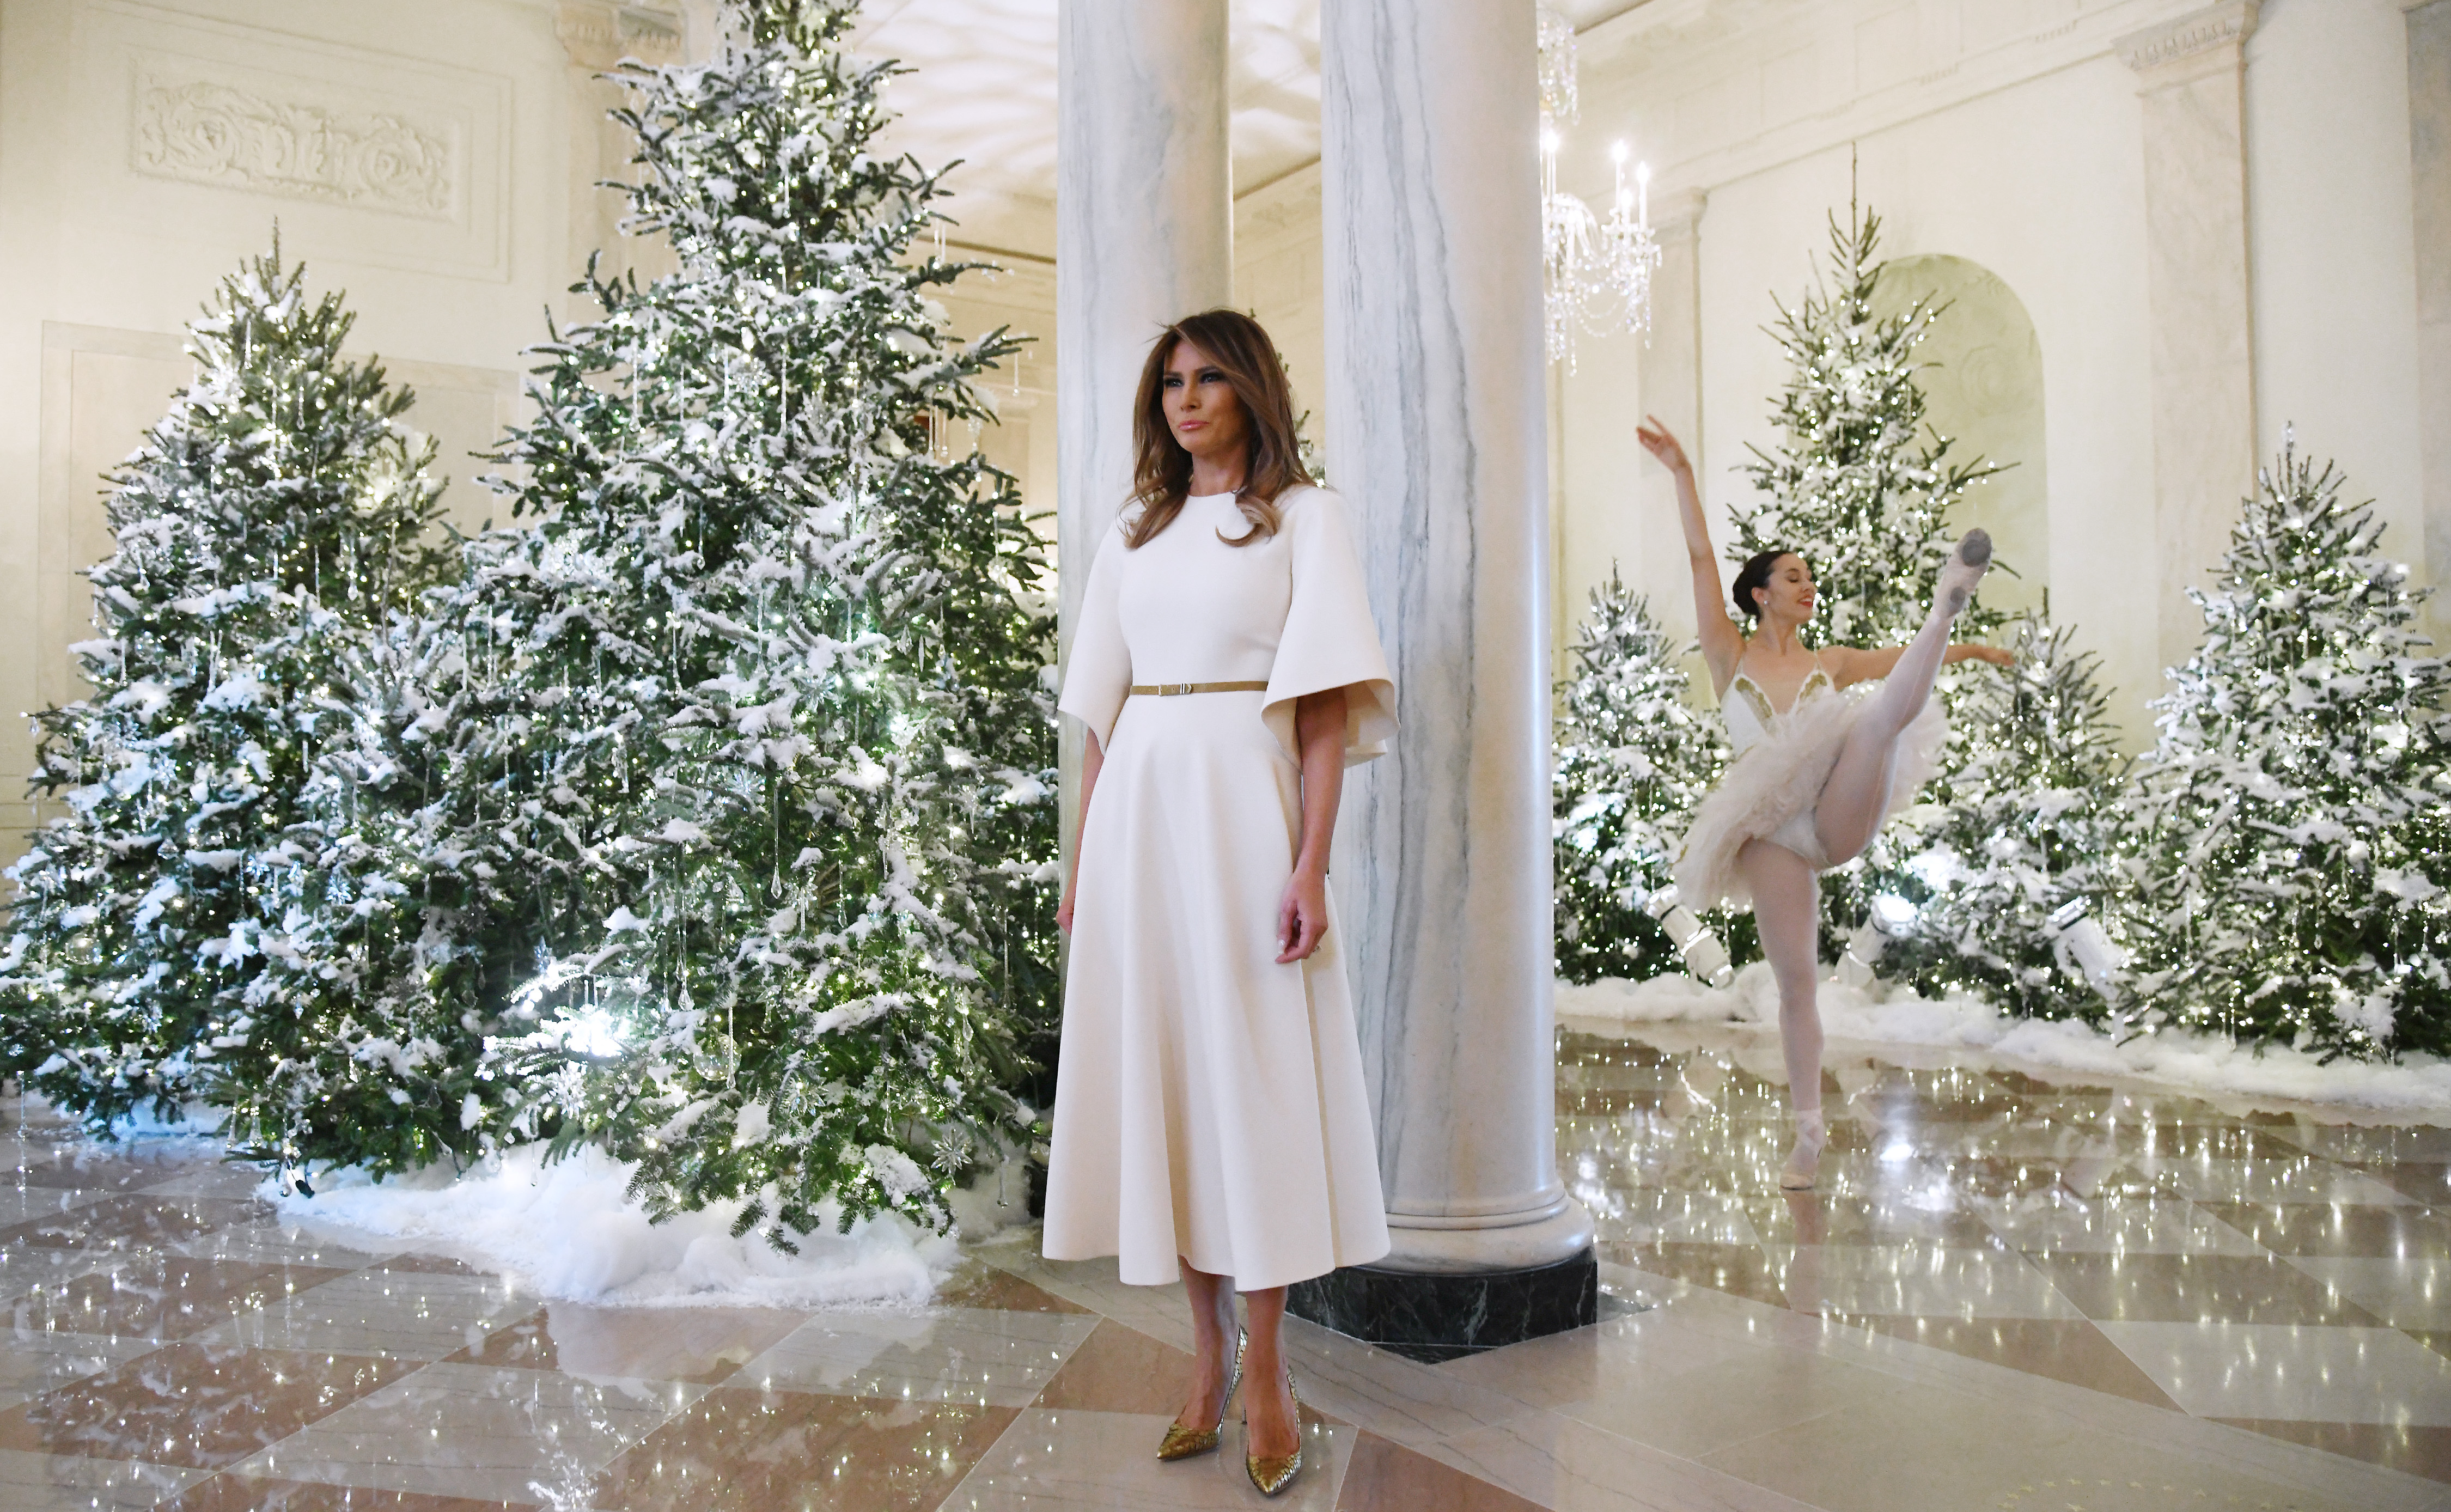 First Lady Melania Trump welcomes children and students from Joint Base Andrews to the White House to view the 2017 holiday decorations